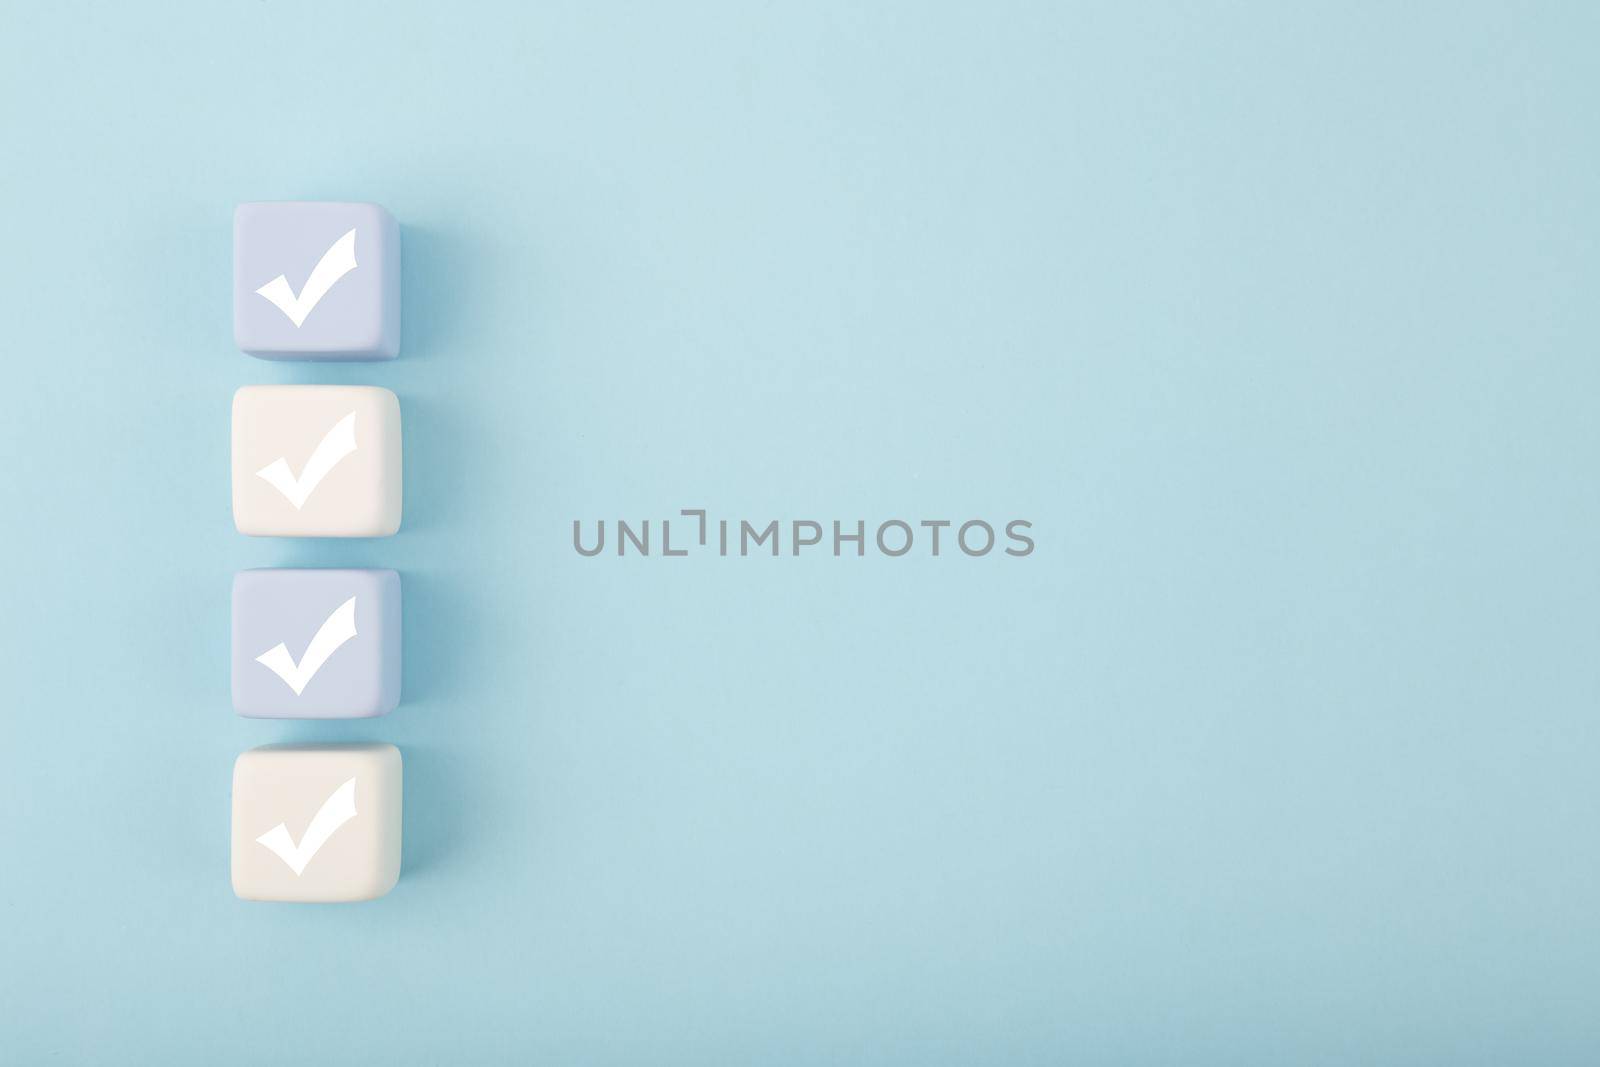 Four checkmarks on light toy blocks against pastel blue background with copy space by Senorina_Irina